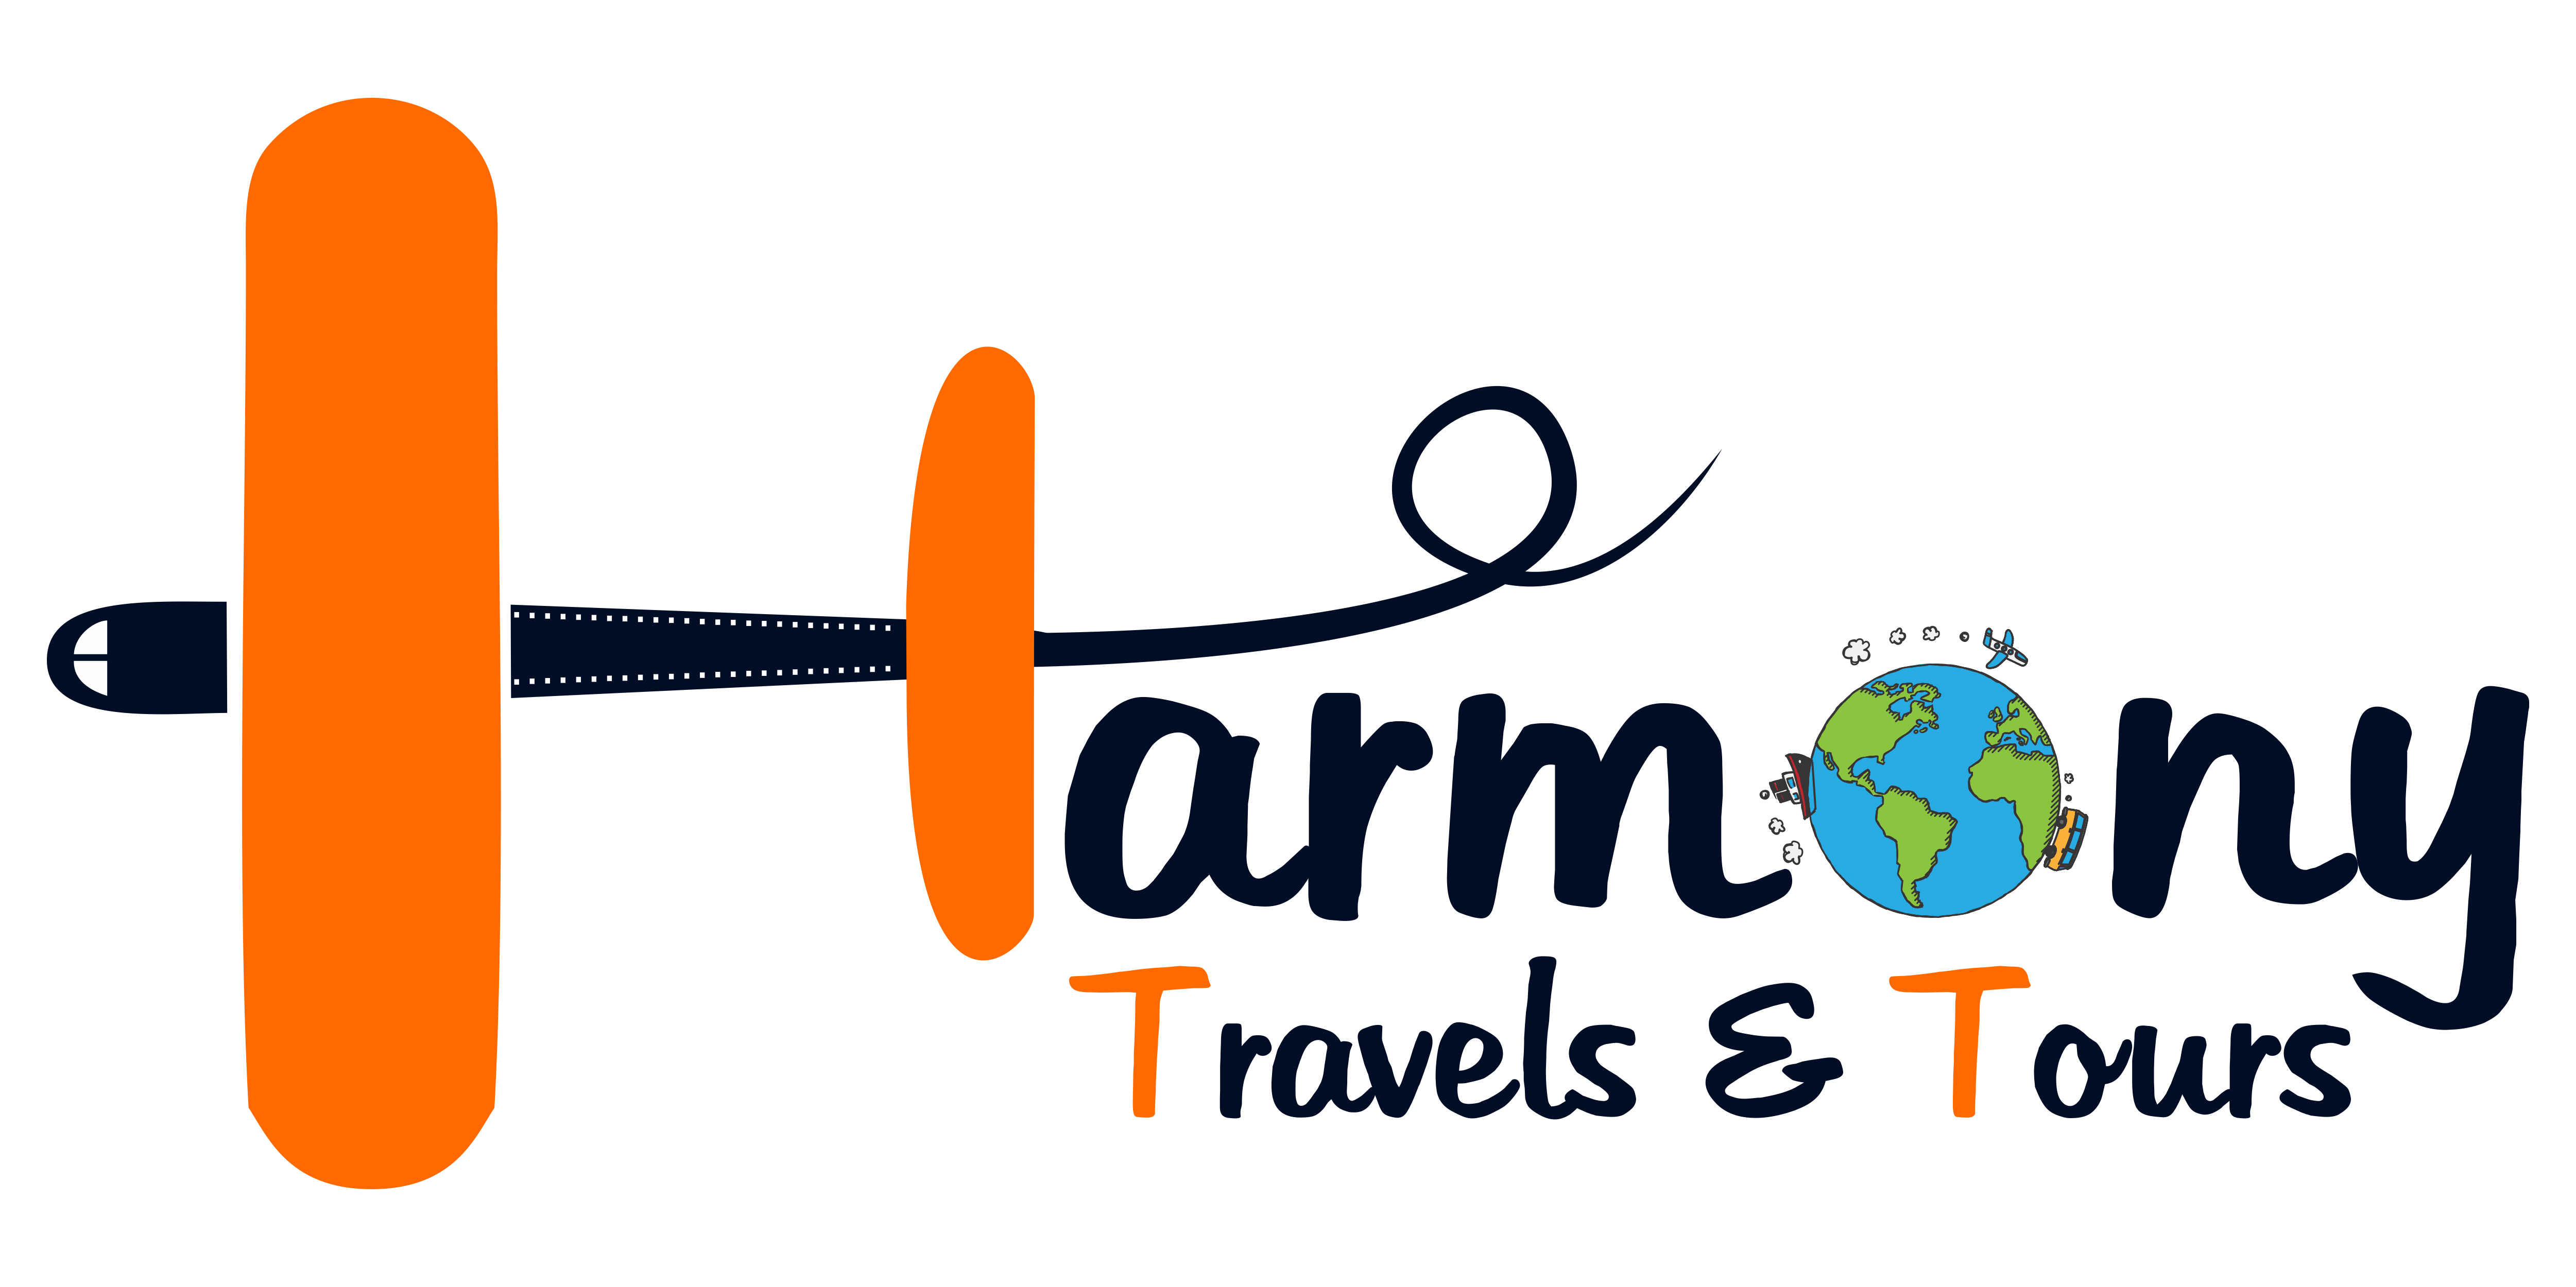 Harmony Travels and Tours